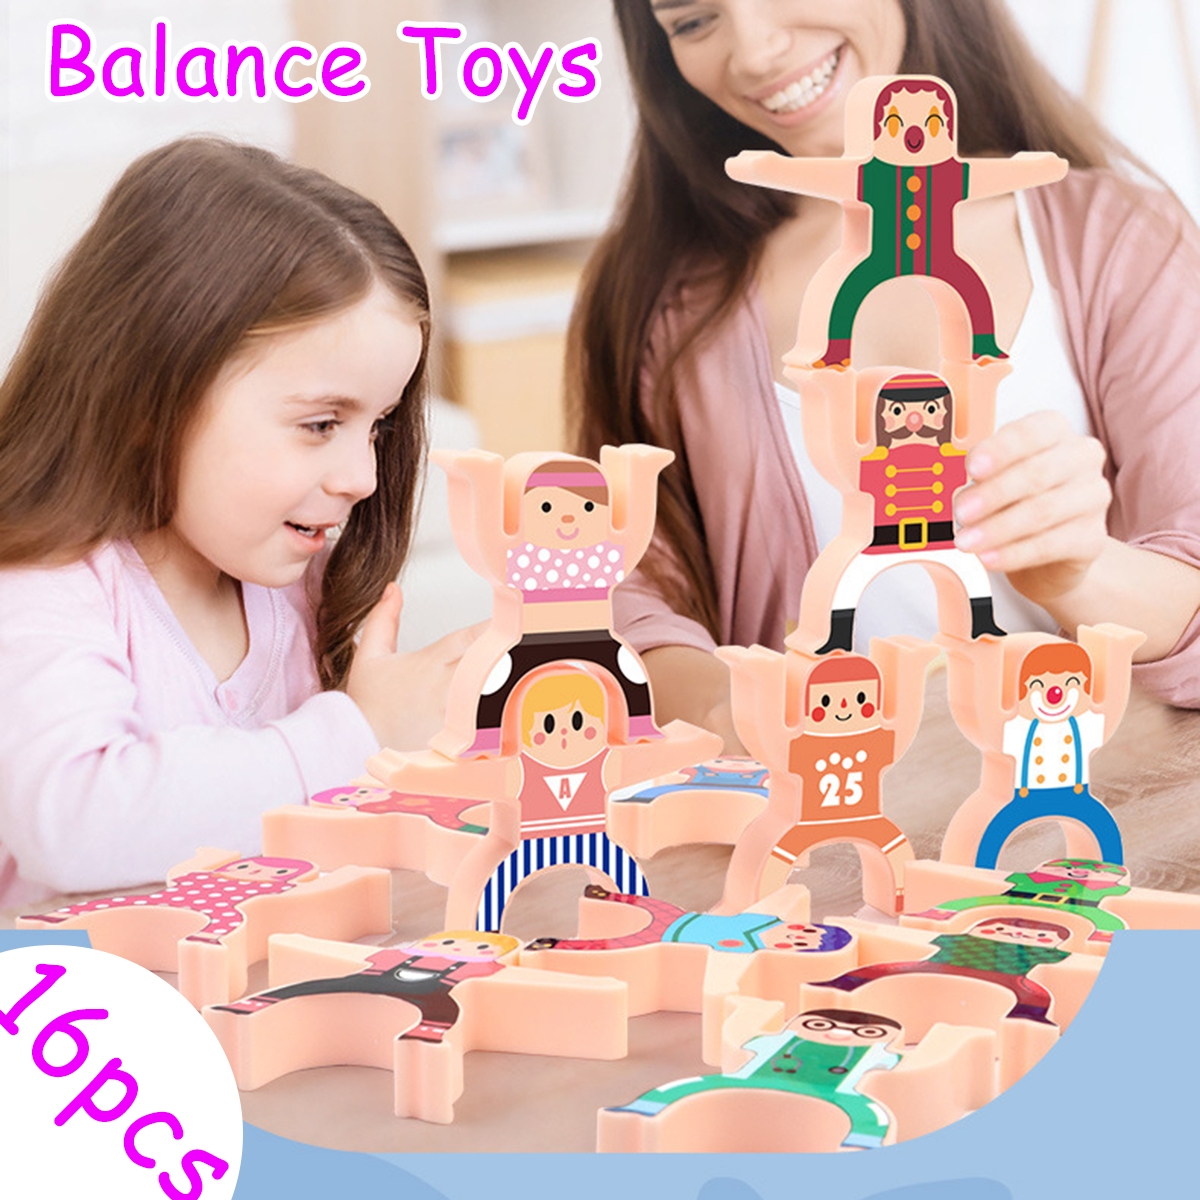 16 Pcs Wooden Stacking Game Balance Building Block Game Toddler Puzzle Play Educational Toy for Kids Gift